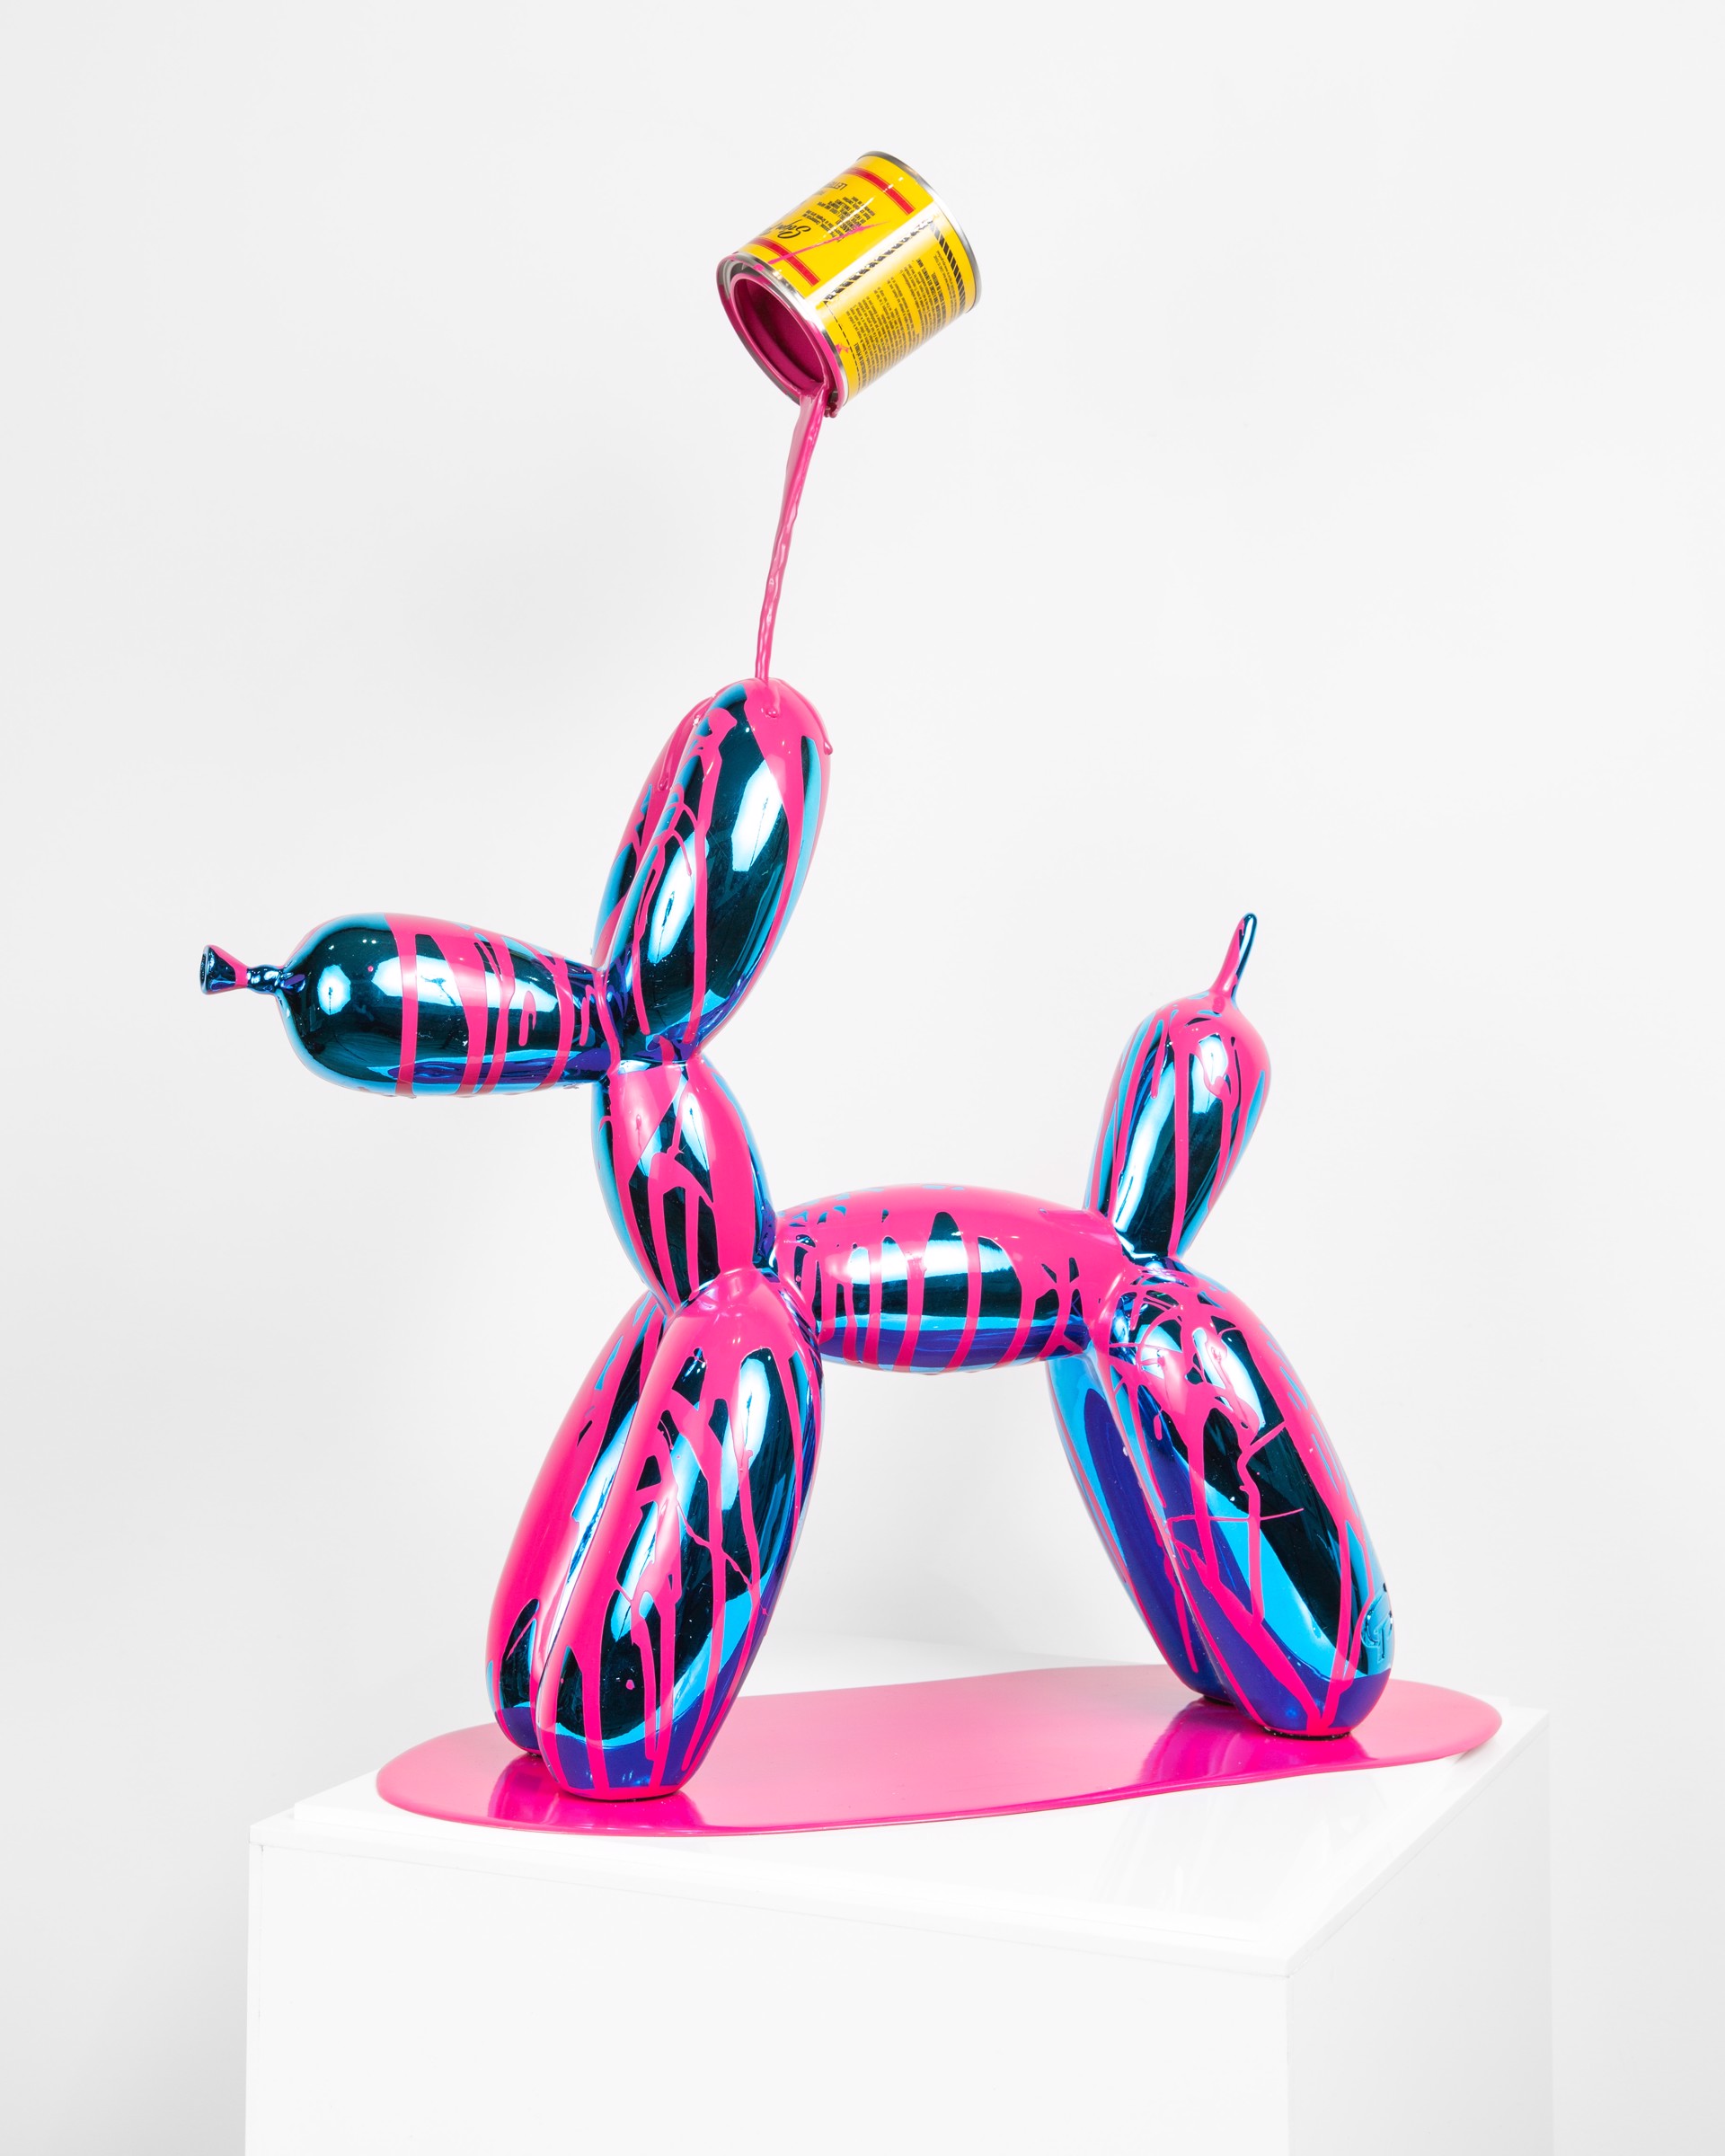 Happy accident series - Big Balloon dog (blue and pink) - commission by Joe Suzuki